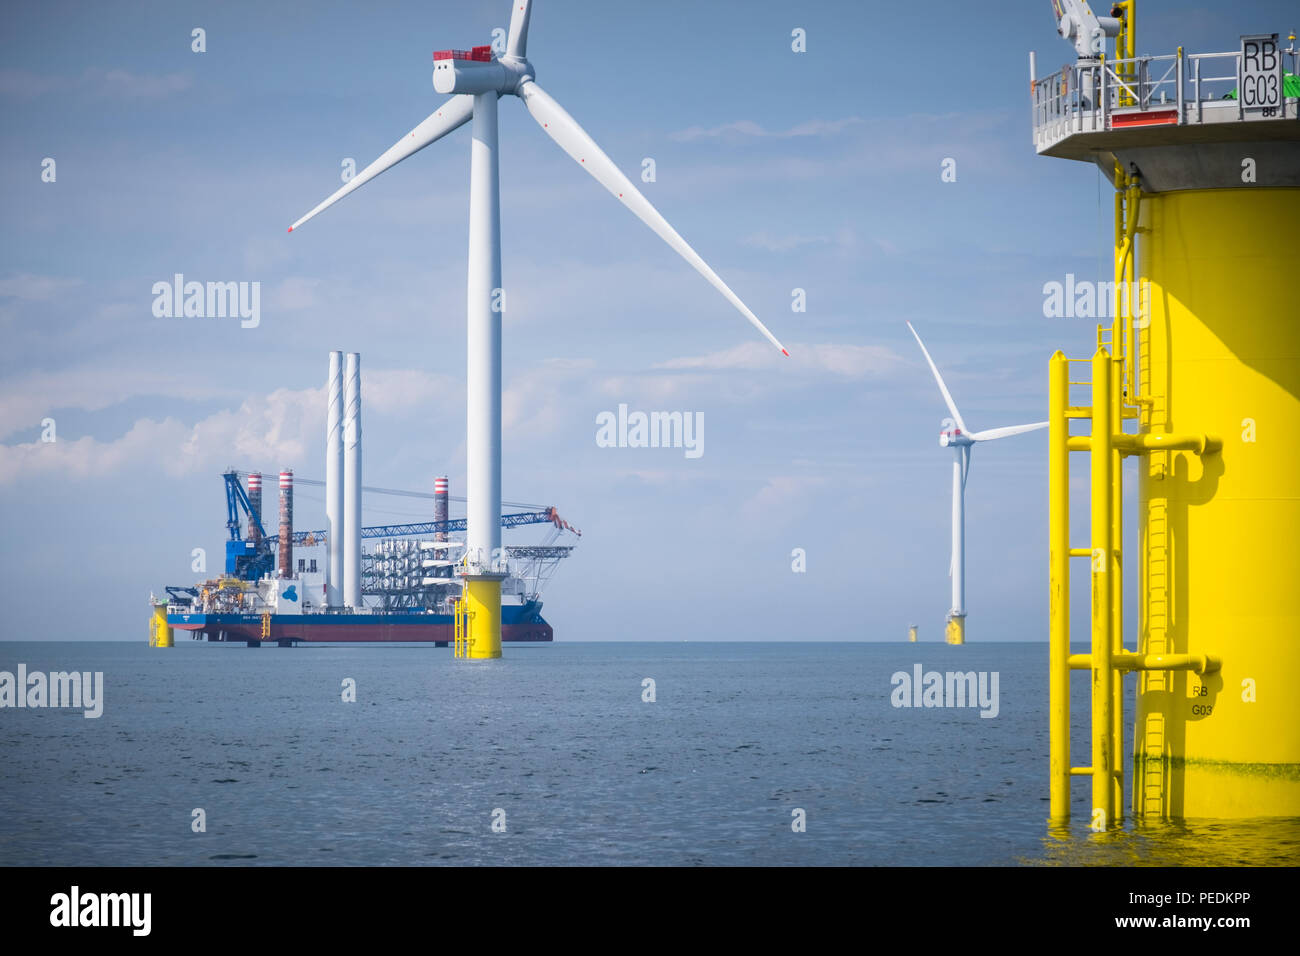 A2Sea's jack-up turbine installation vessel, Sea Installer, on the Race Bank Offshore Wind Farm in the Southern North Sea, UK Stock Photo